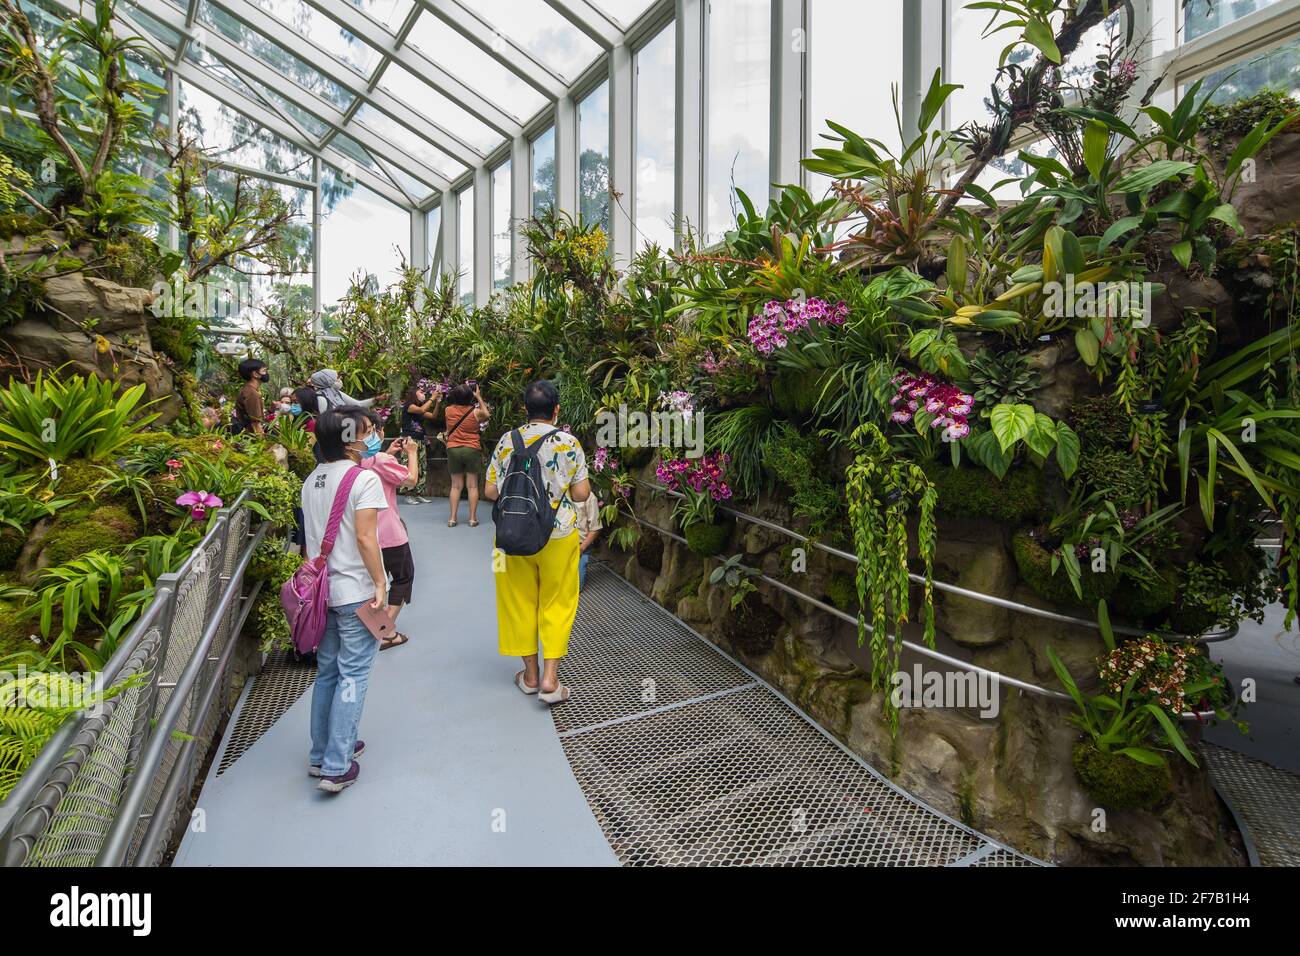 Local visitors are enjoying the pretty interior landscaping of The Sembcorp Cool House at National Orchid Garden, Singapore. Stock Photo